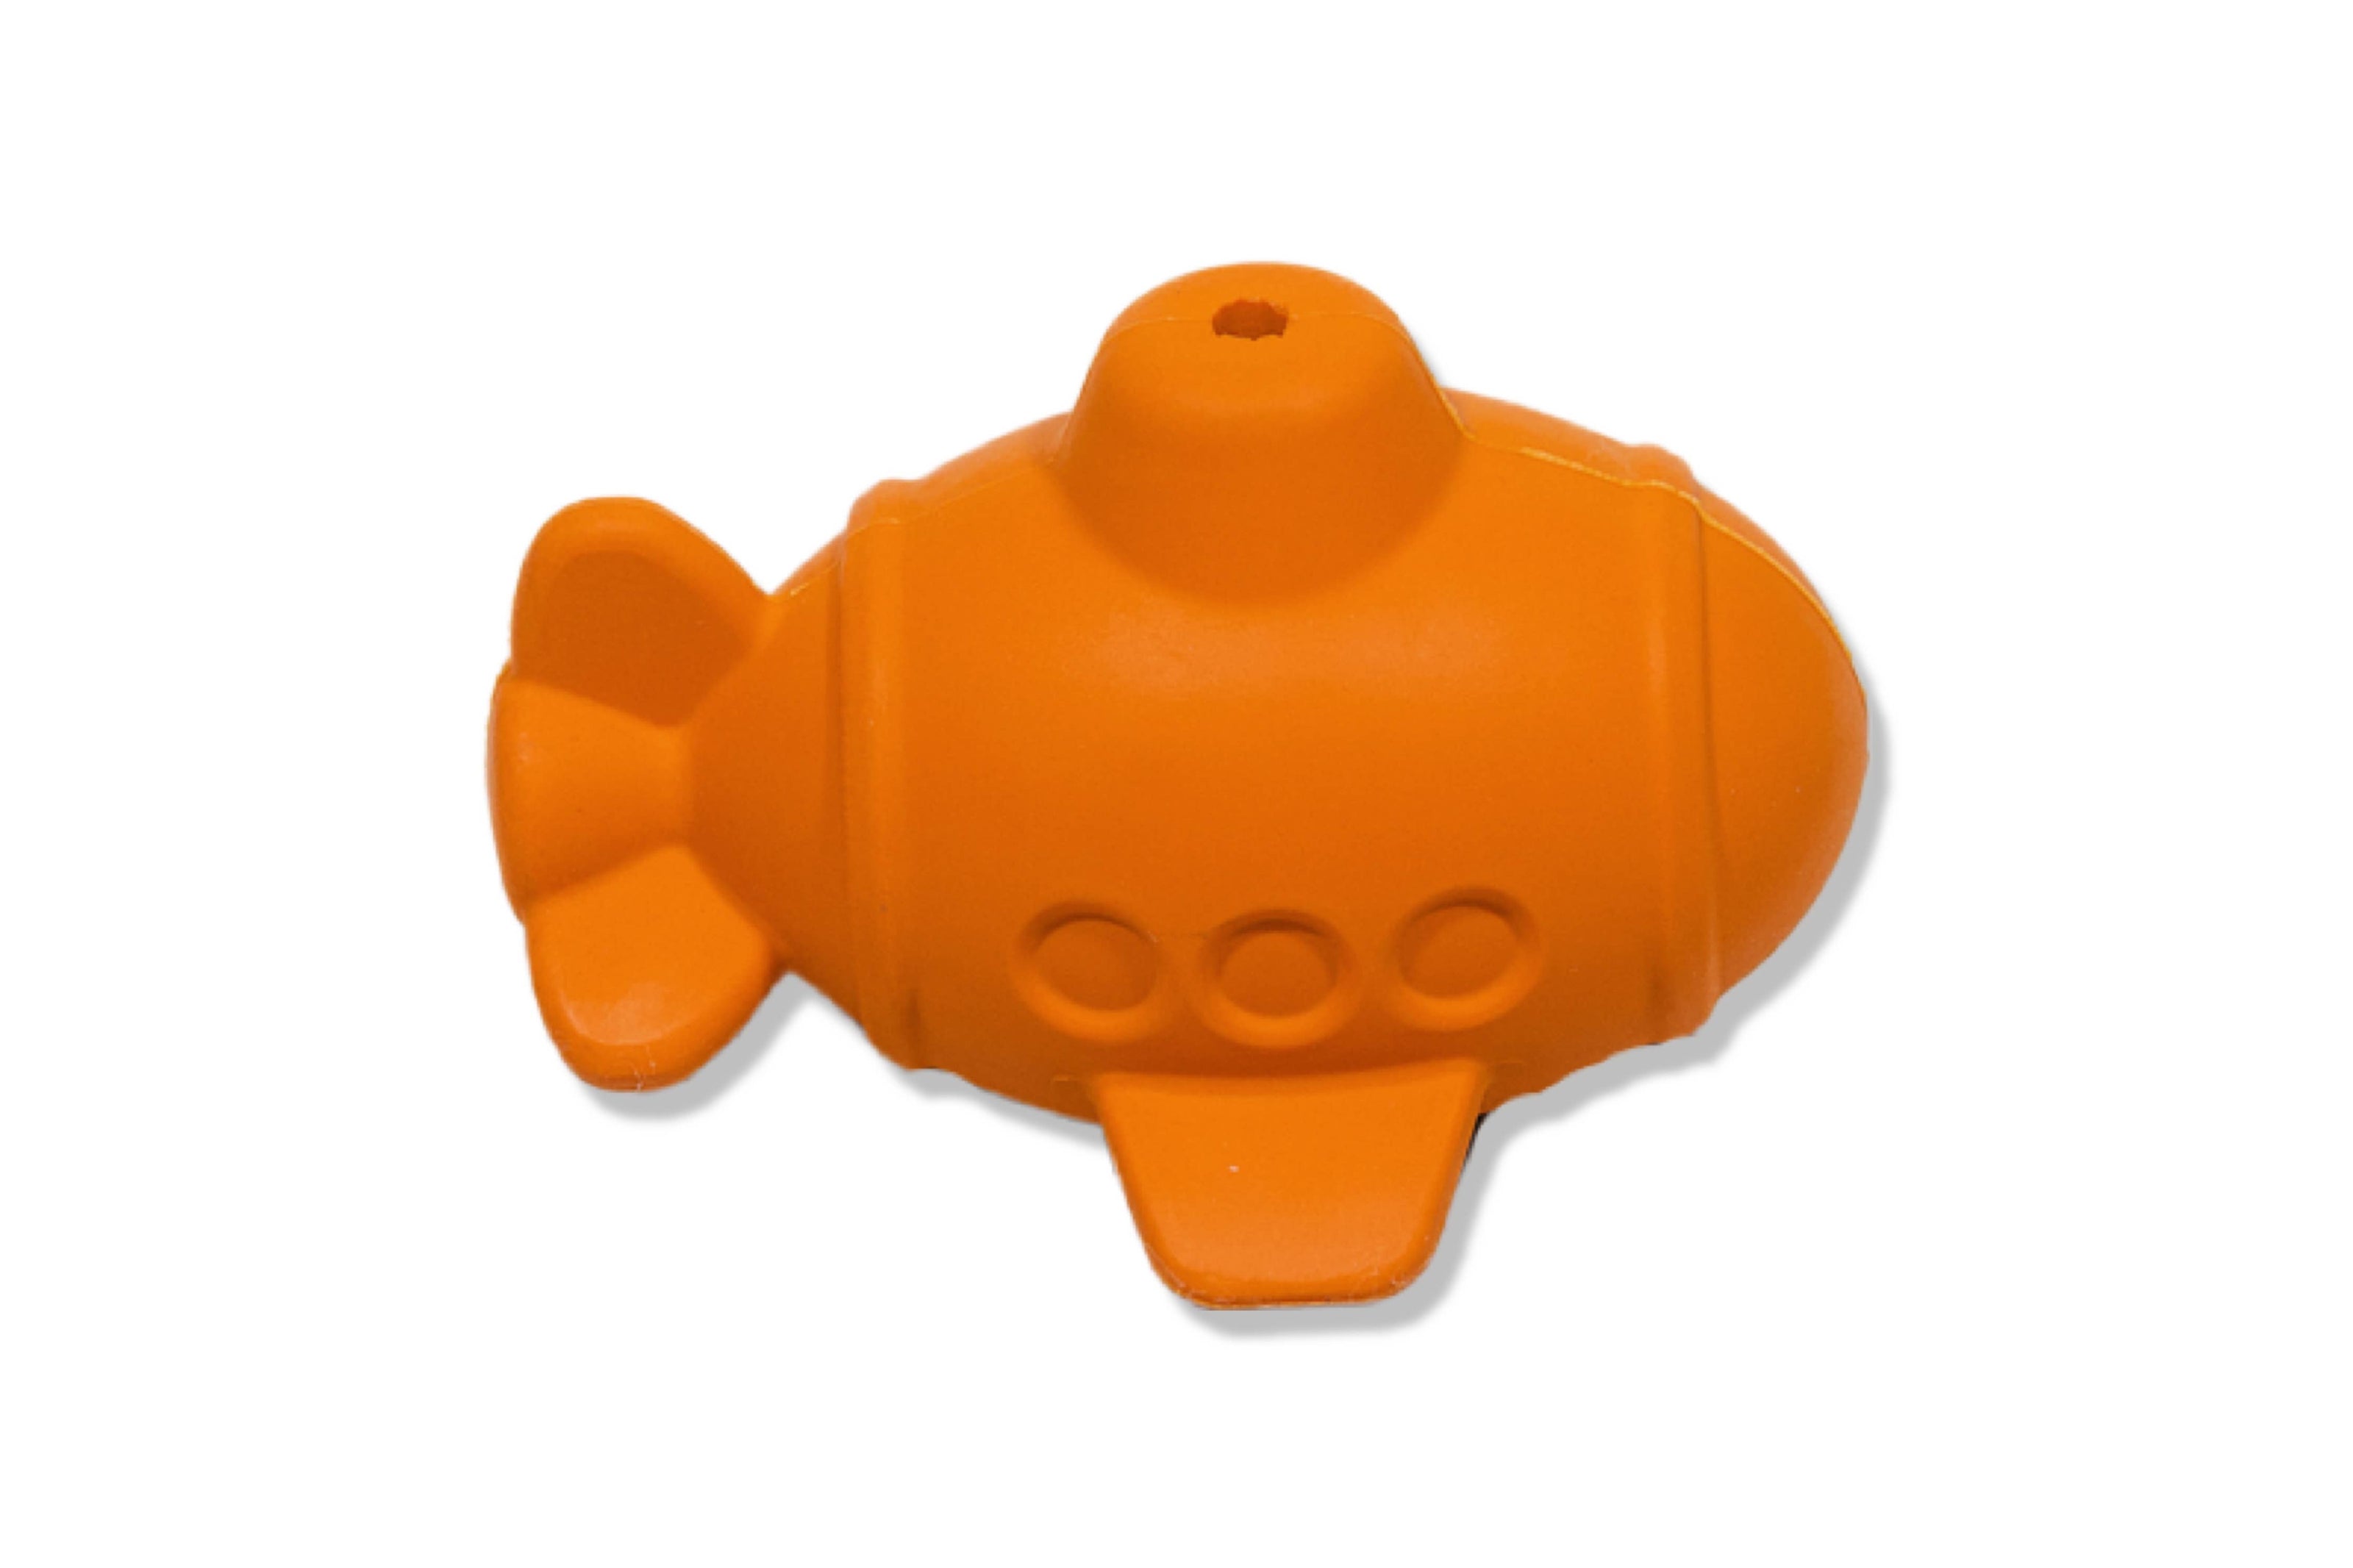 Water Pals Toy - Extra Large Drain Holes!